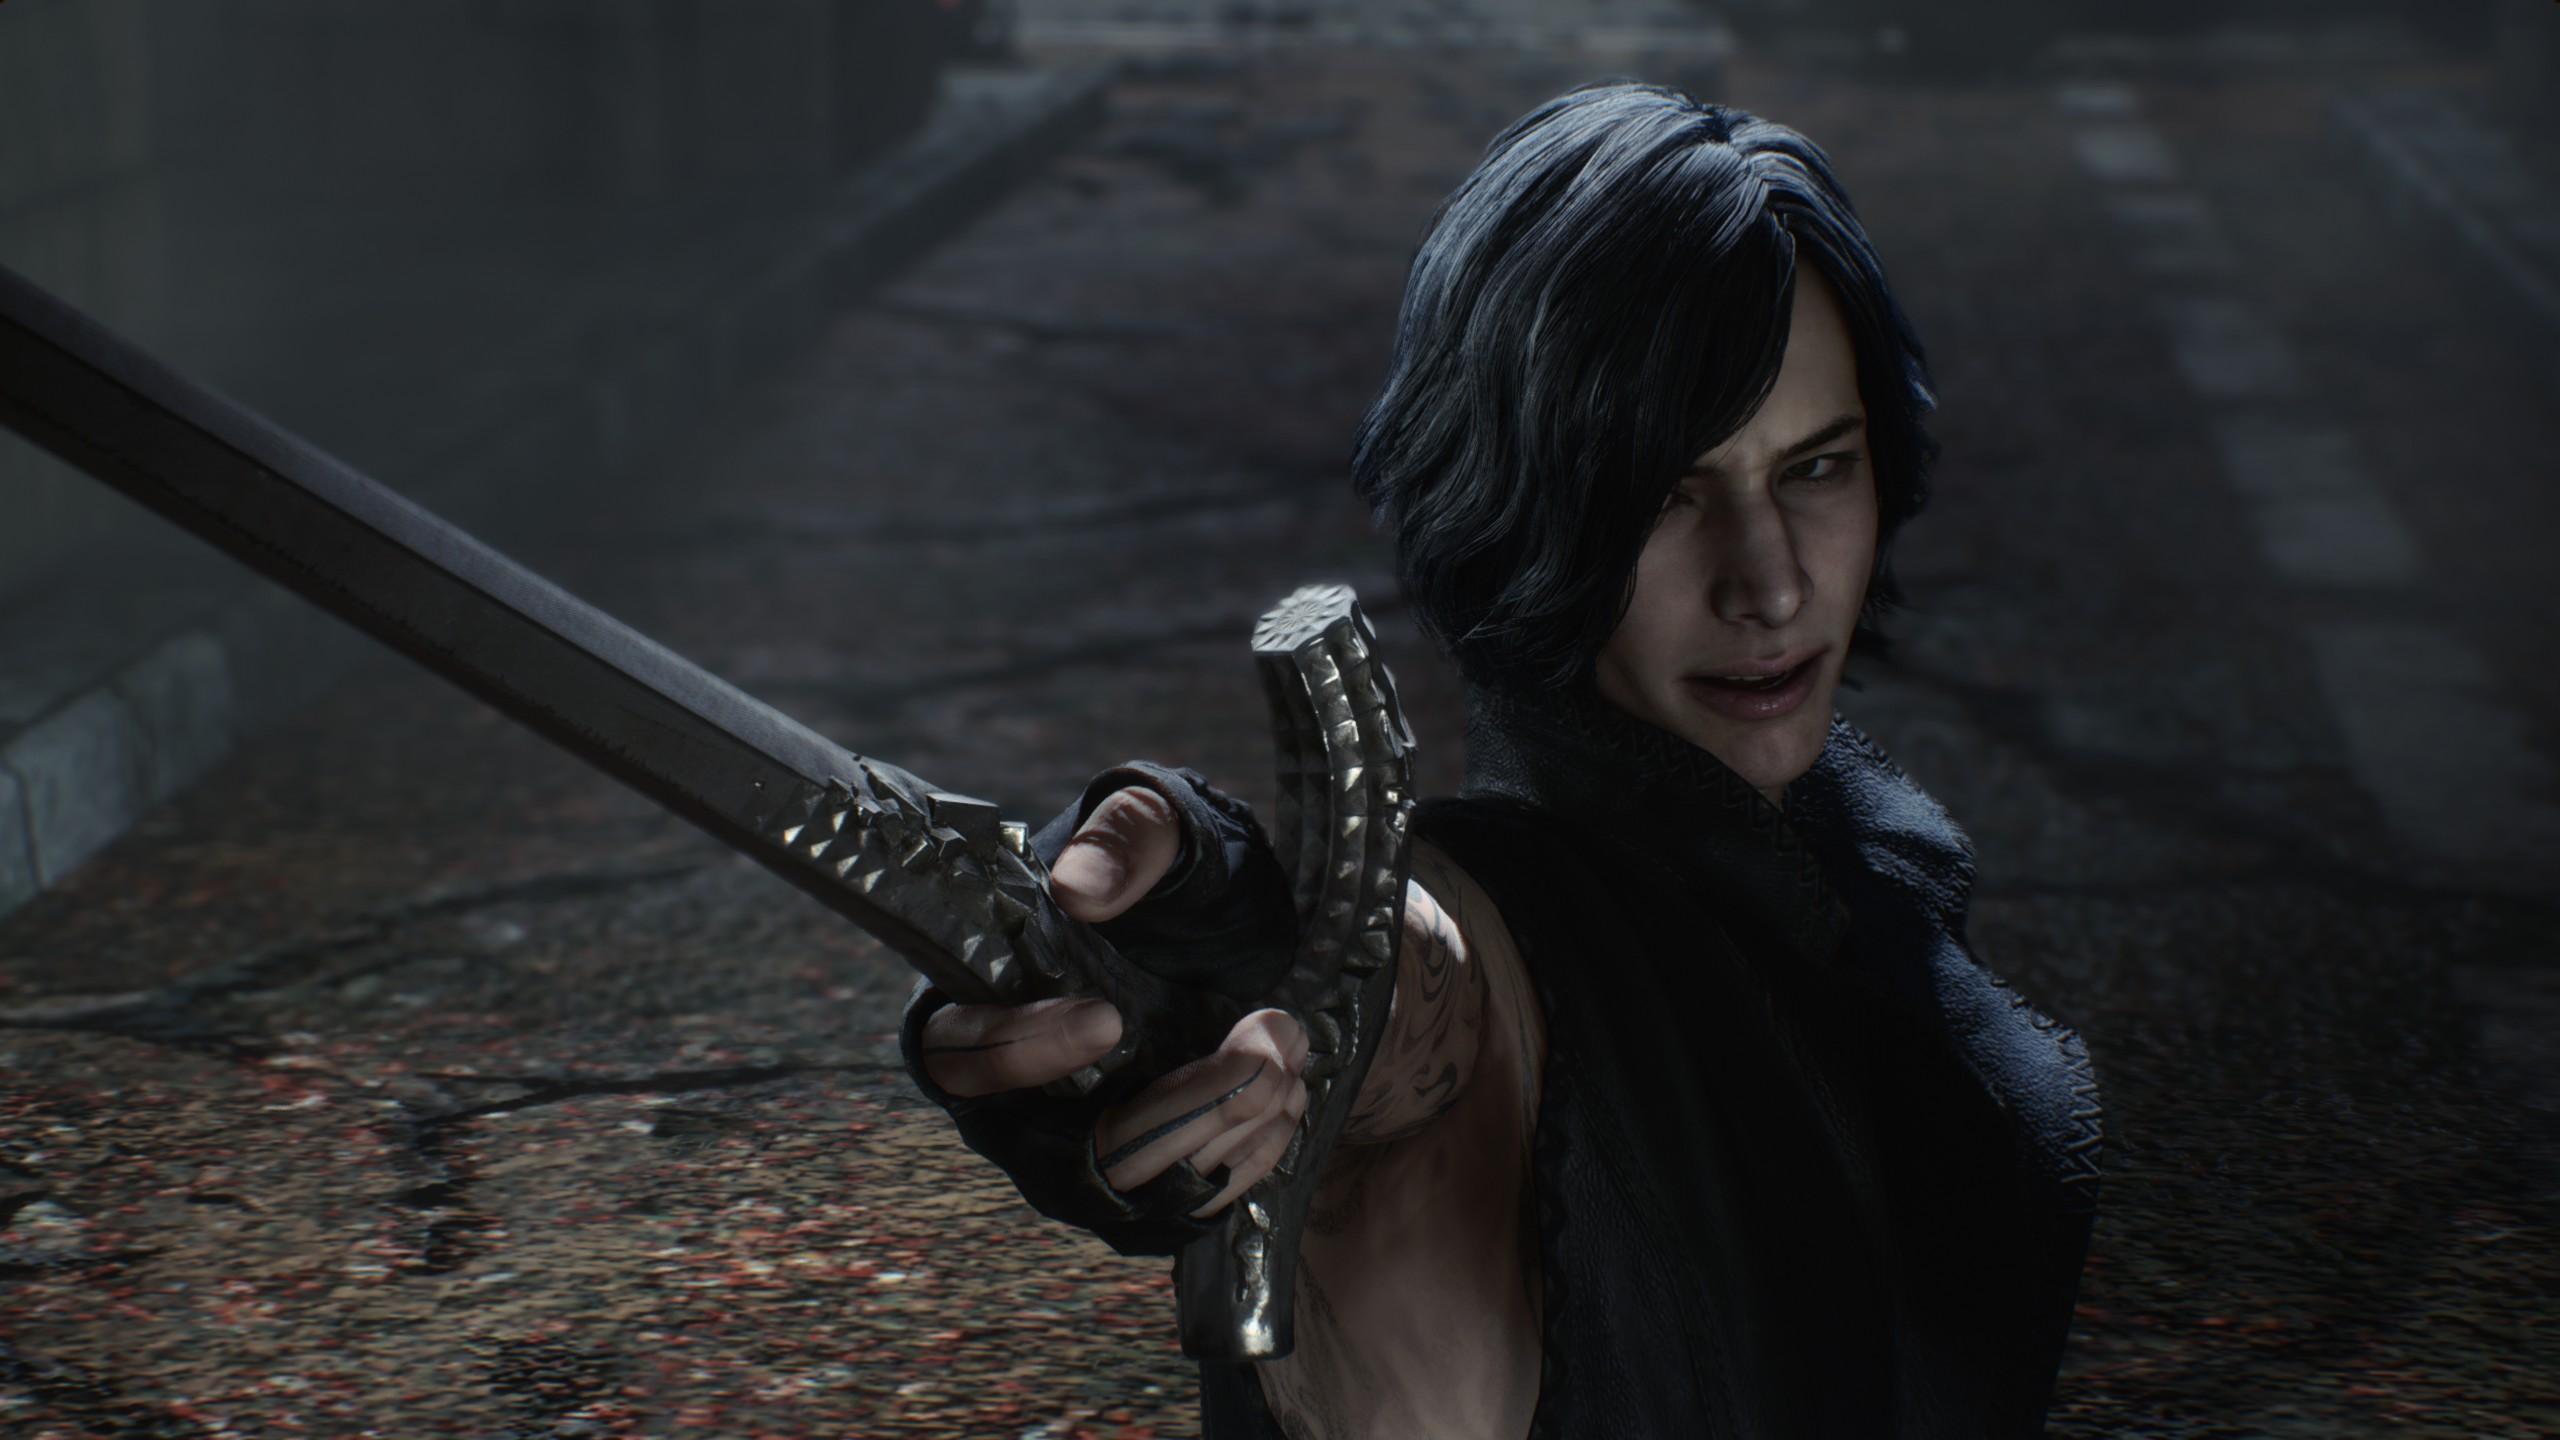 Watch Devil May Cry 5 Players Pulling Off Wild, 100 Hit Combos. PC